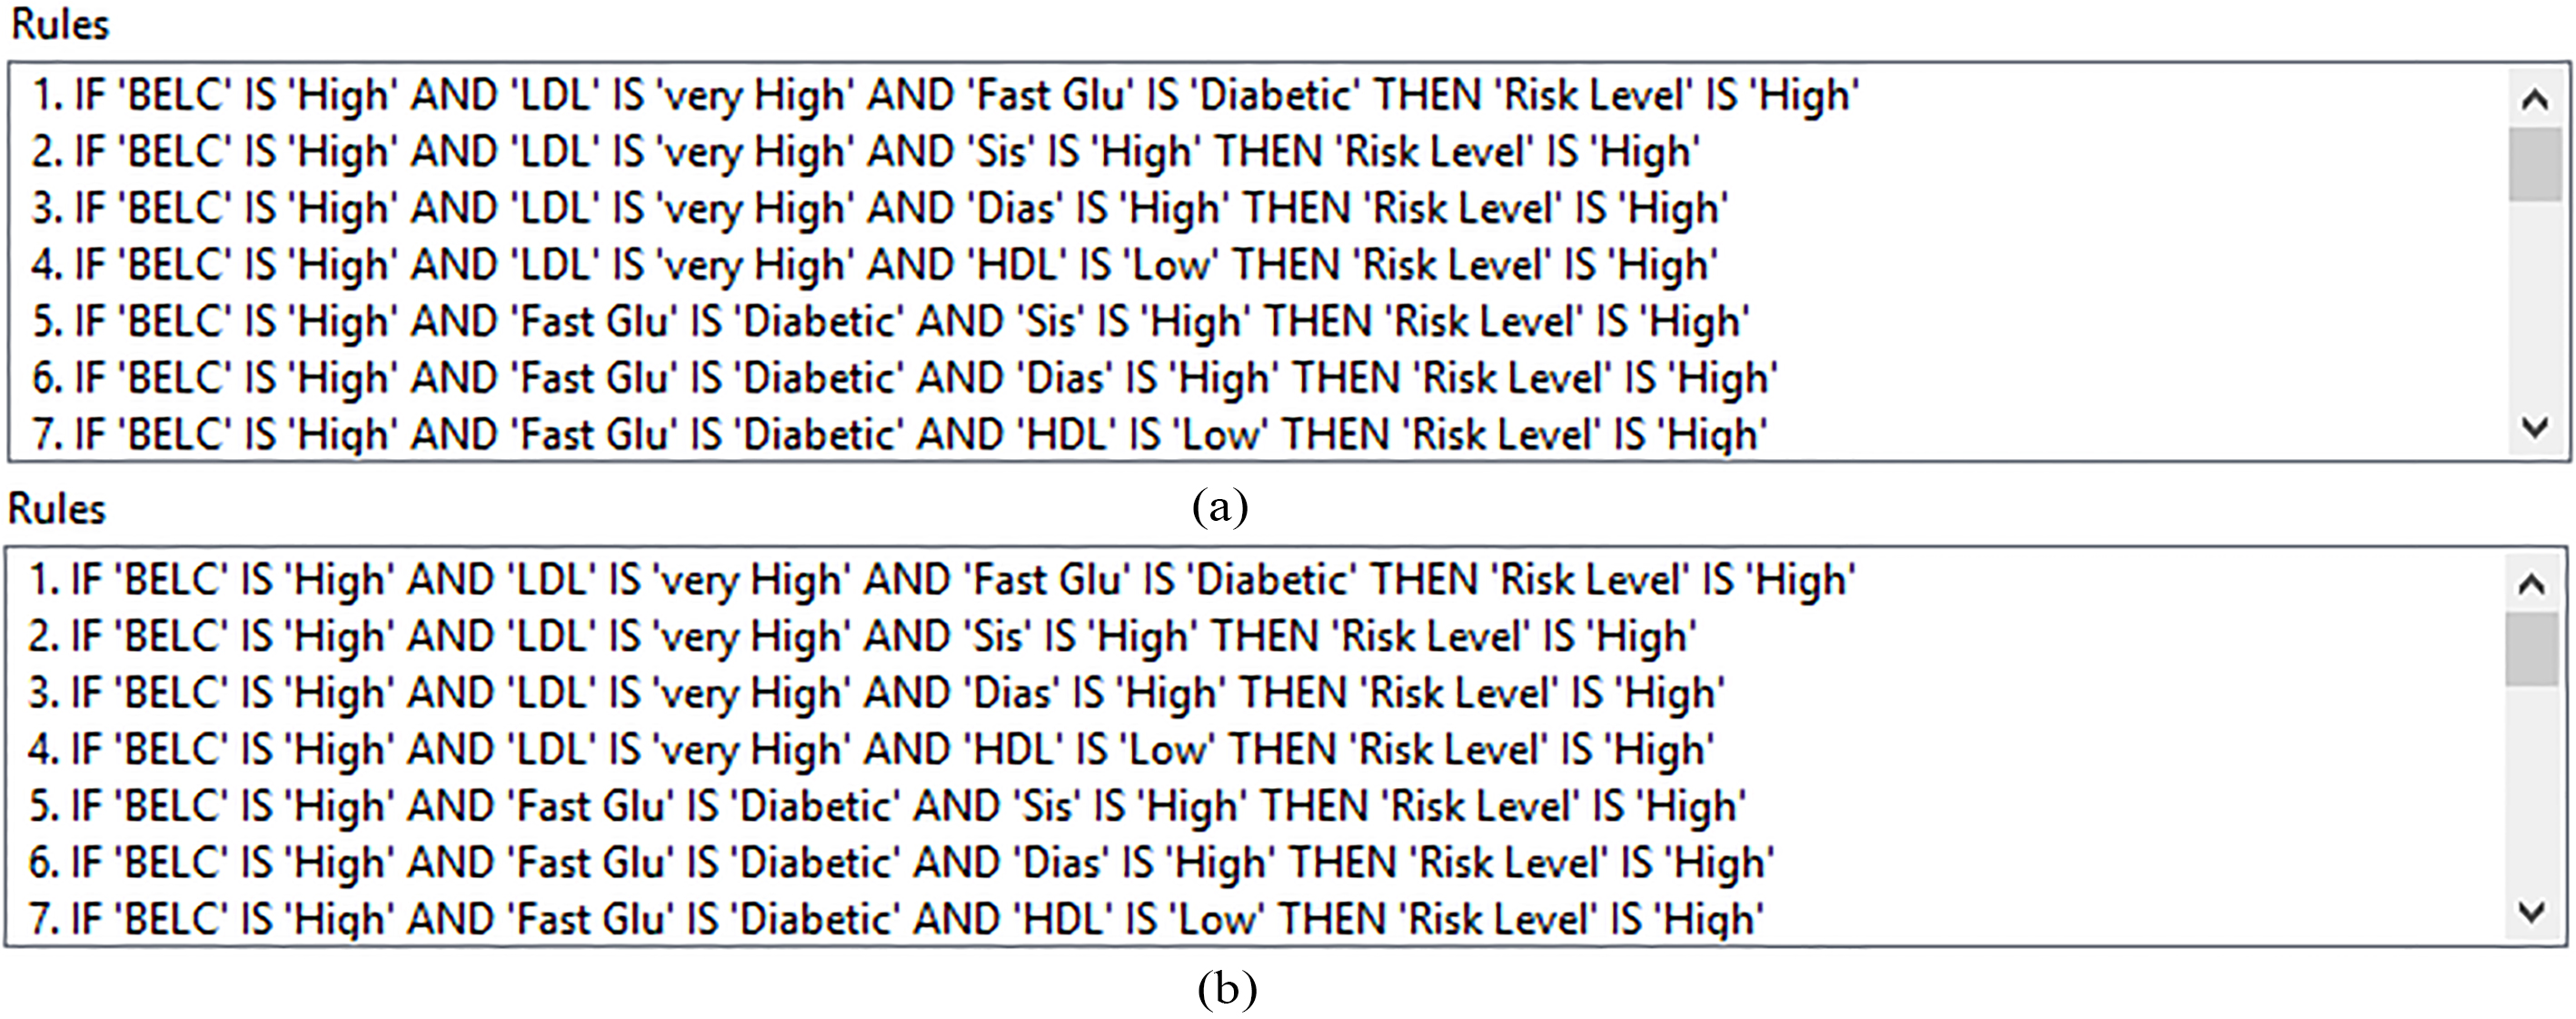 Linguistic rule samples. (a) For MetS risk evaluation. (b) For HeartScore calculation.